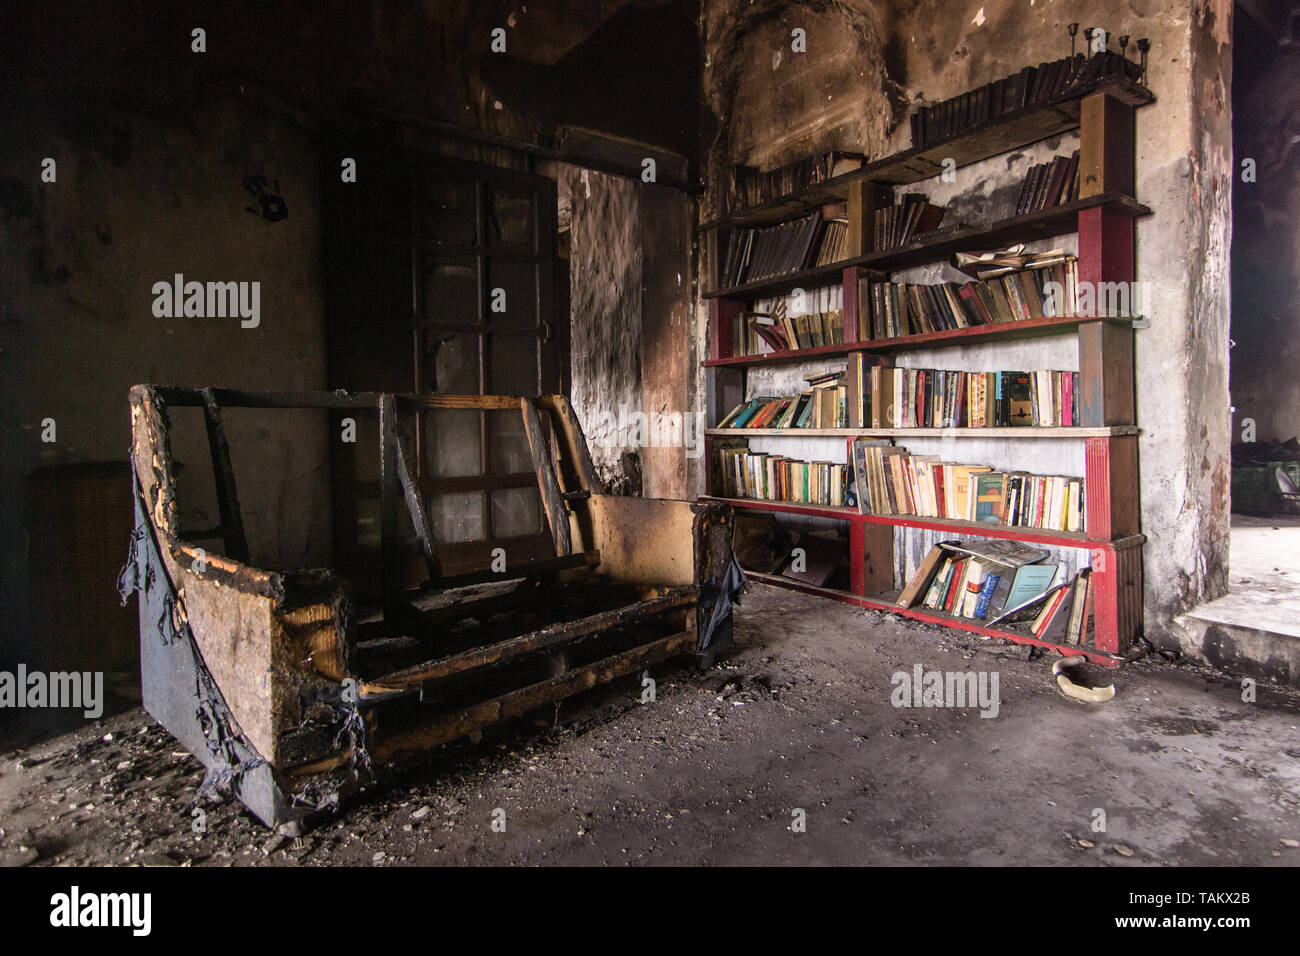 Sofa and book case burnt after a fire. Disaster, Ignorance, Brain Washing, Desolation Stock Photo